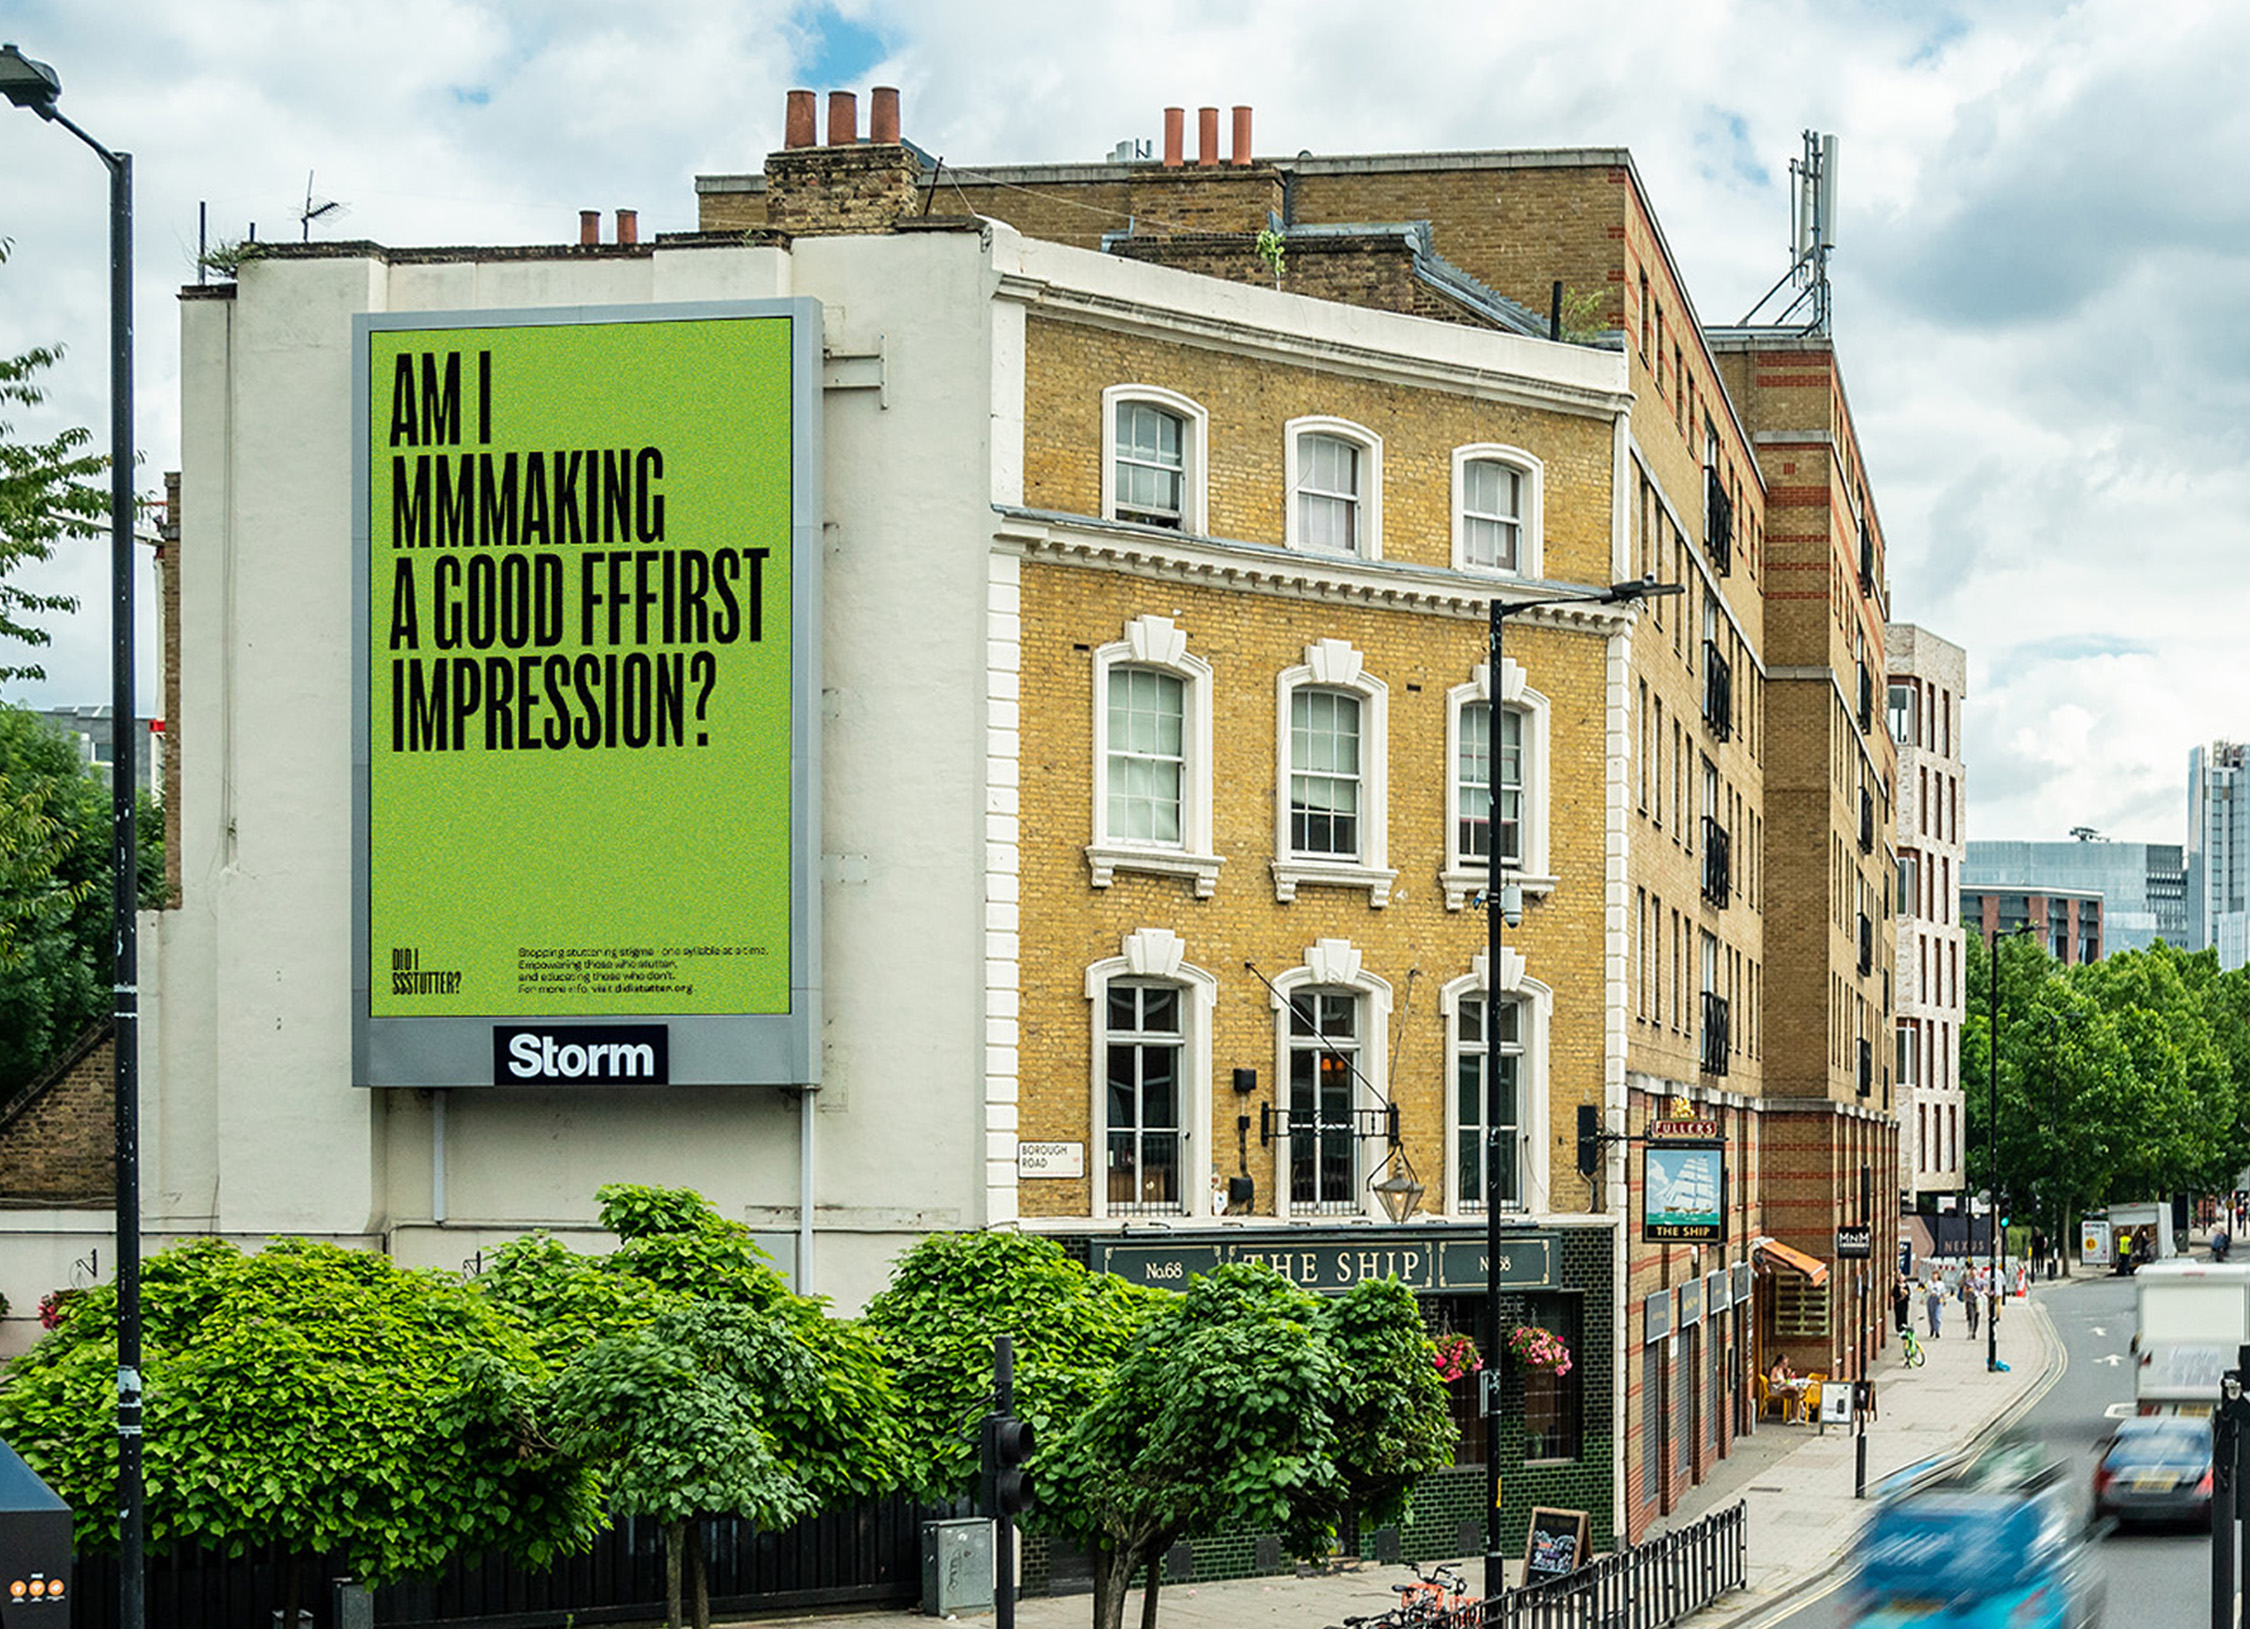 "Am I mmmaking a good fffirst impression" - campaign poster that uses a stutter in physical form. Poster is green with black text on the side of a building.